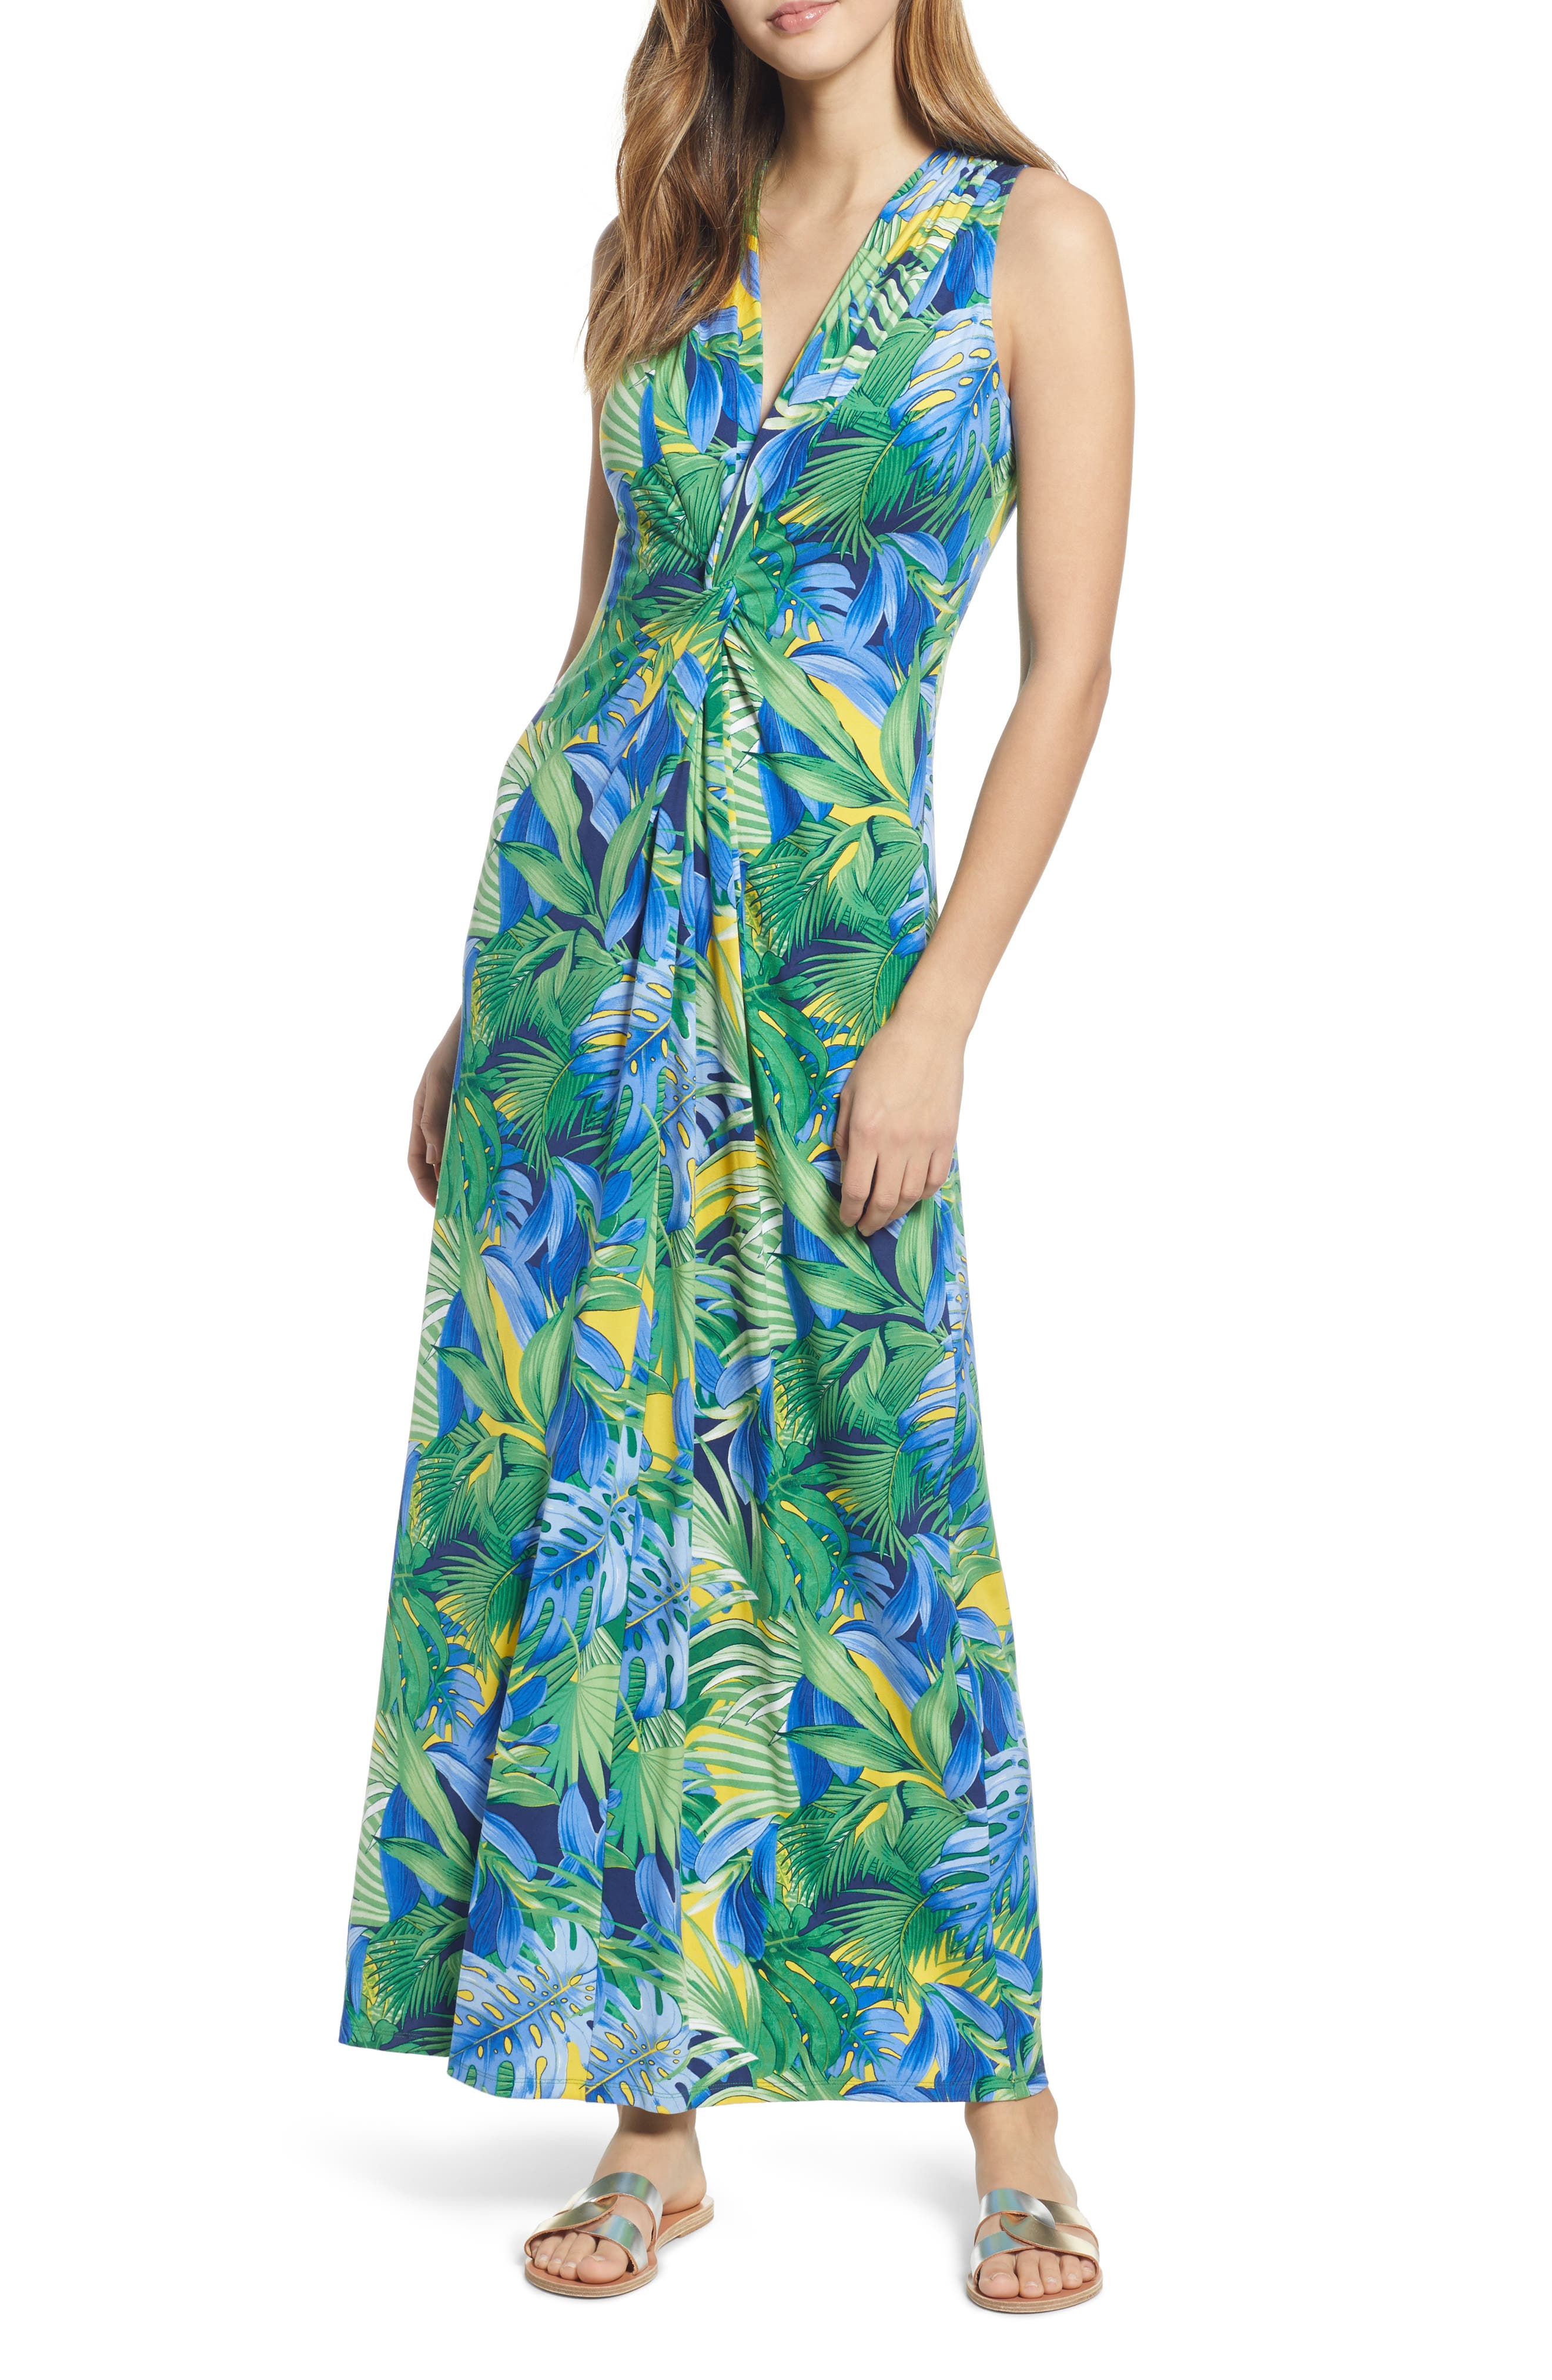 Sunlillies Printed Cover-up Maxi Dress 